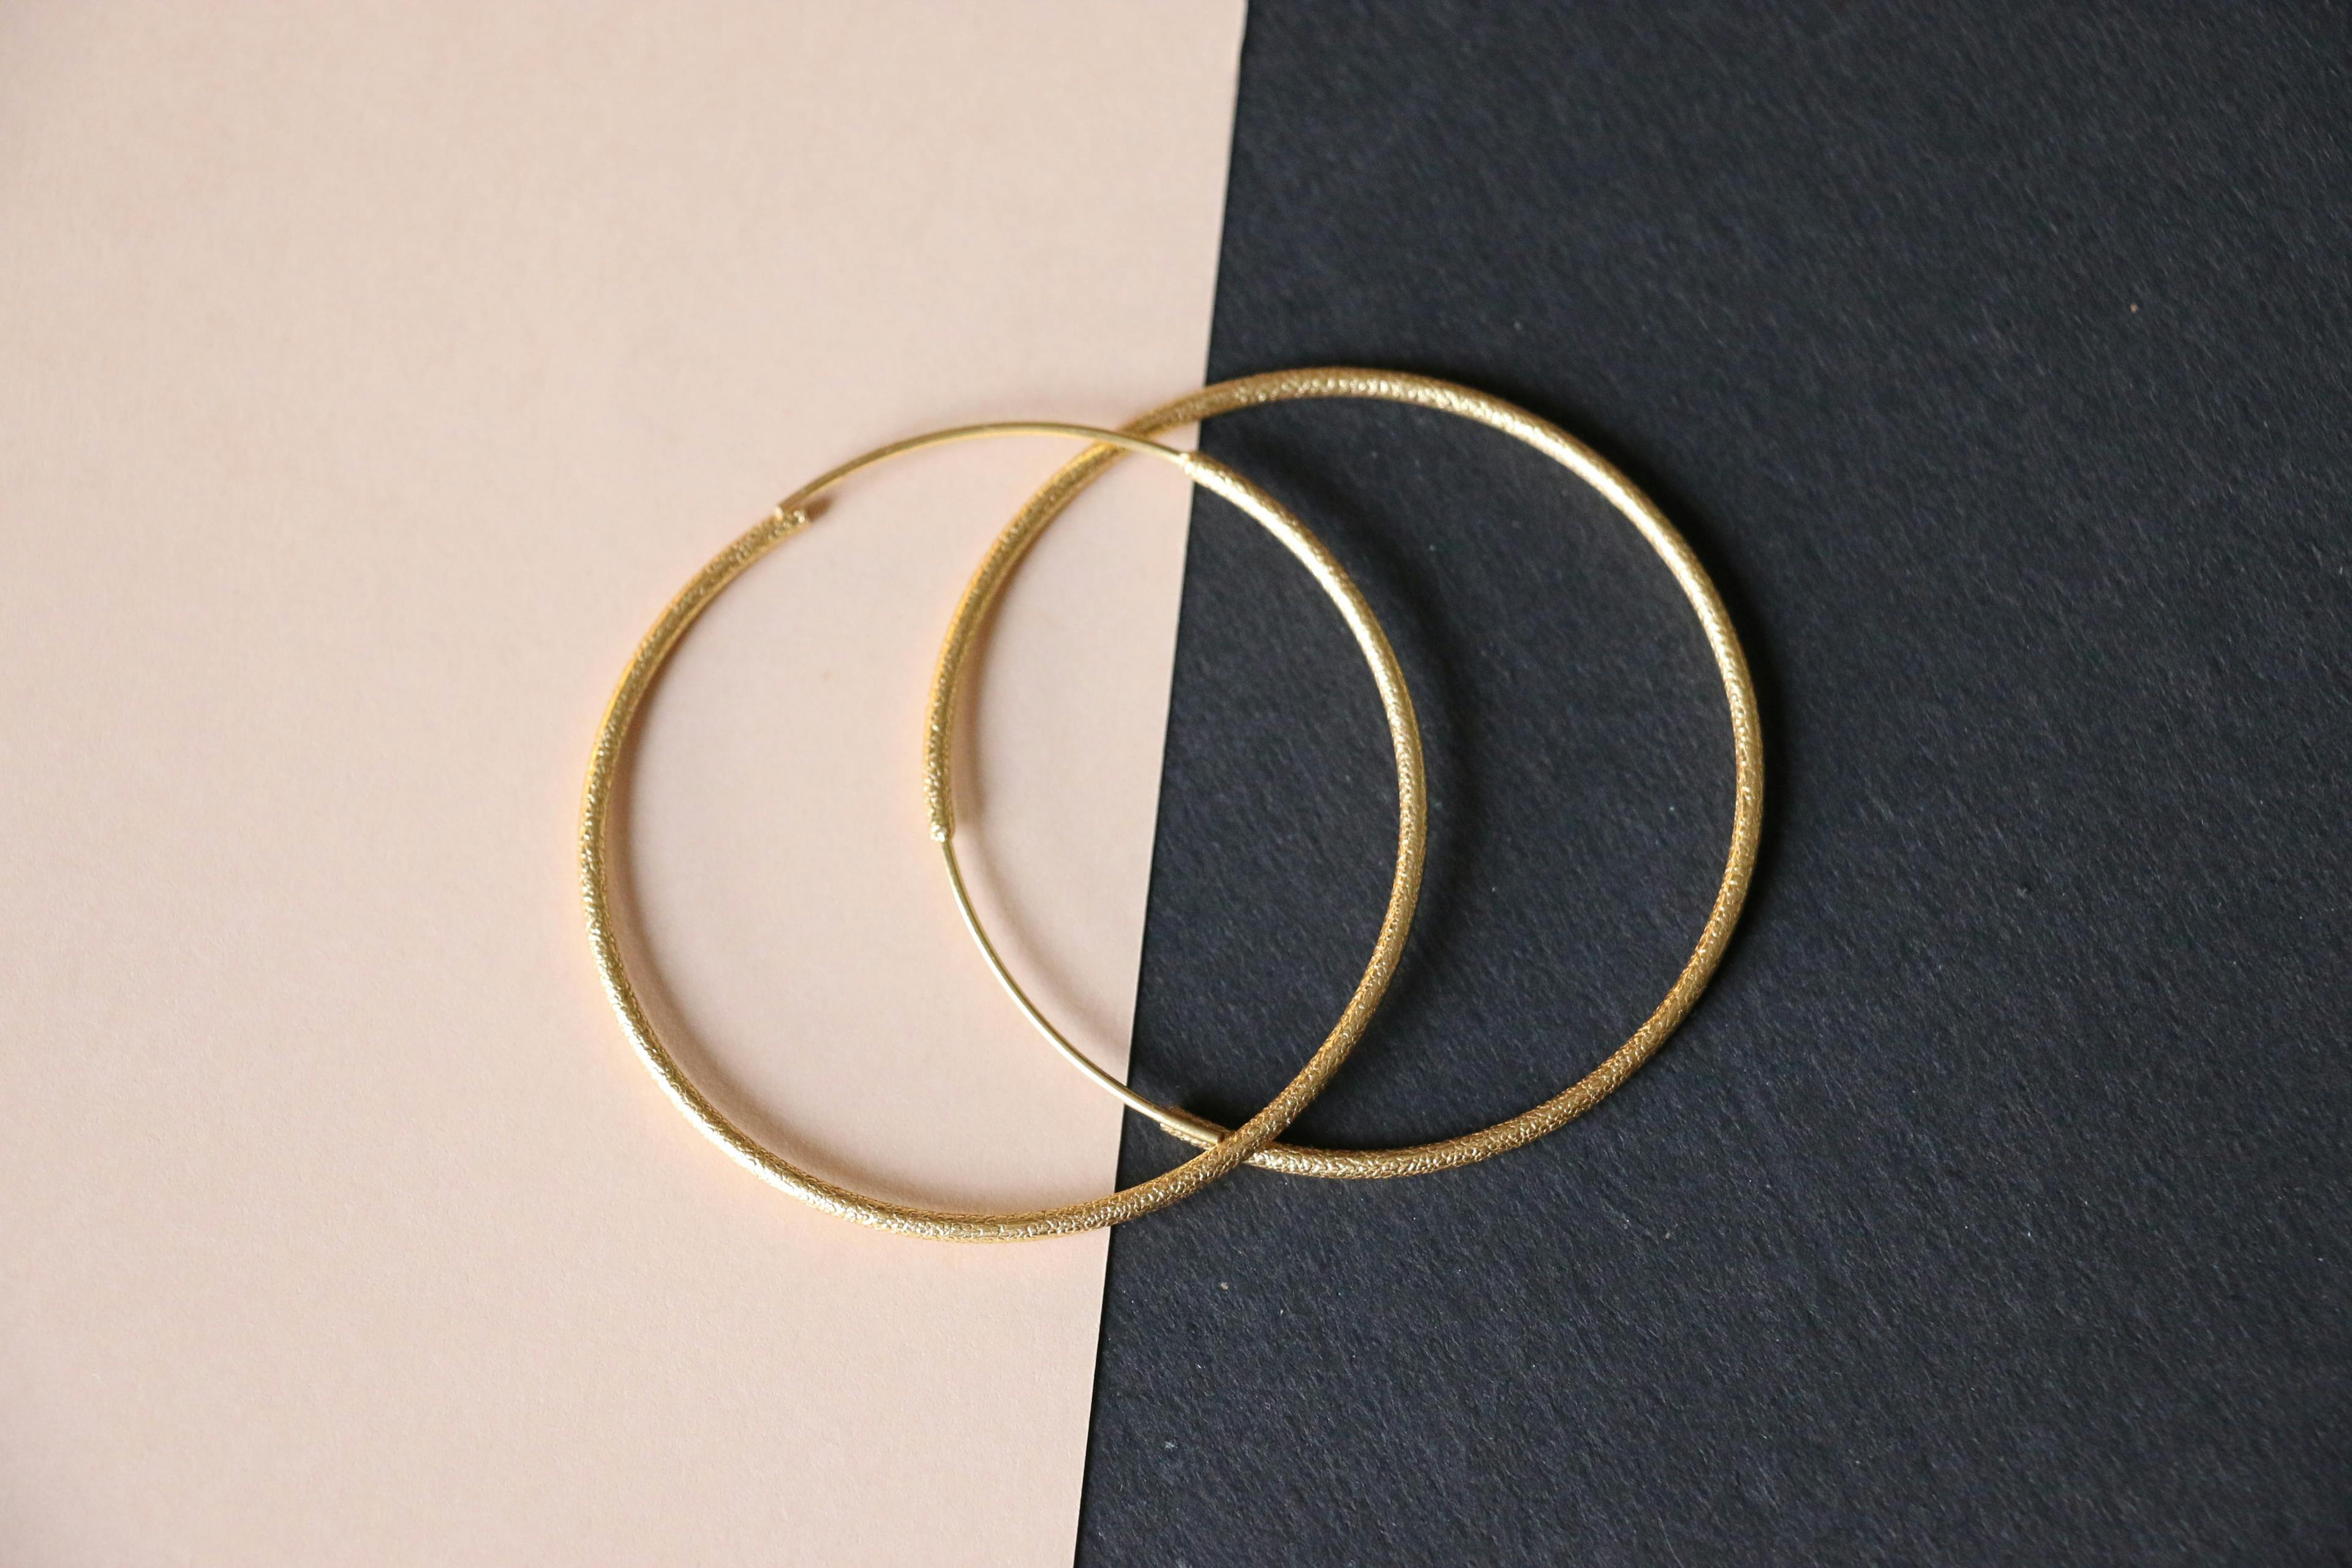 Giant round ear hoops, a product by The Jewel Closet Store